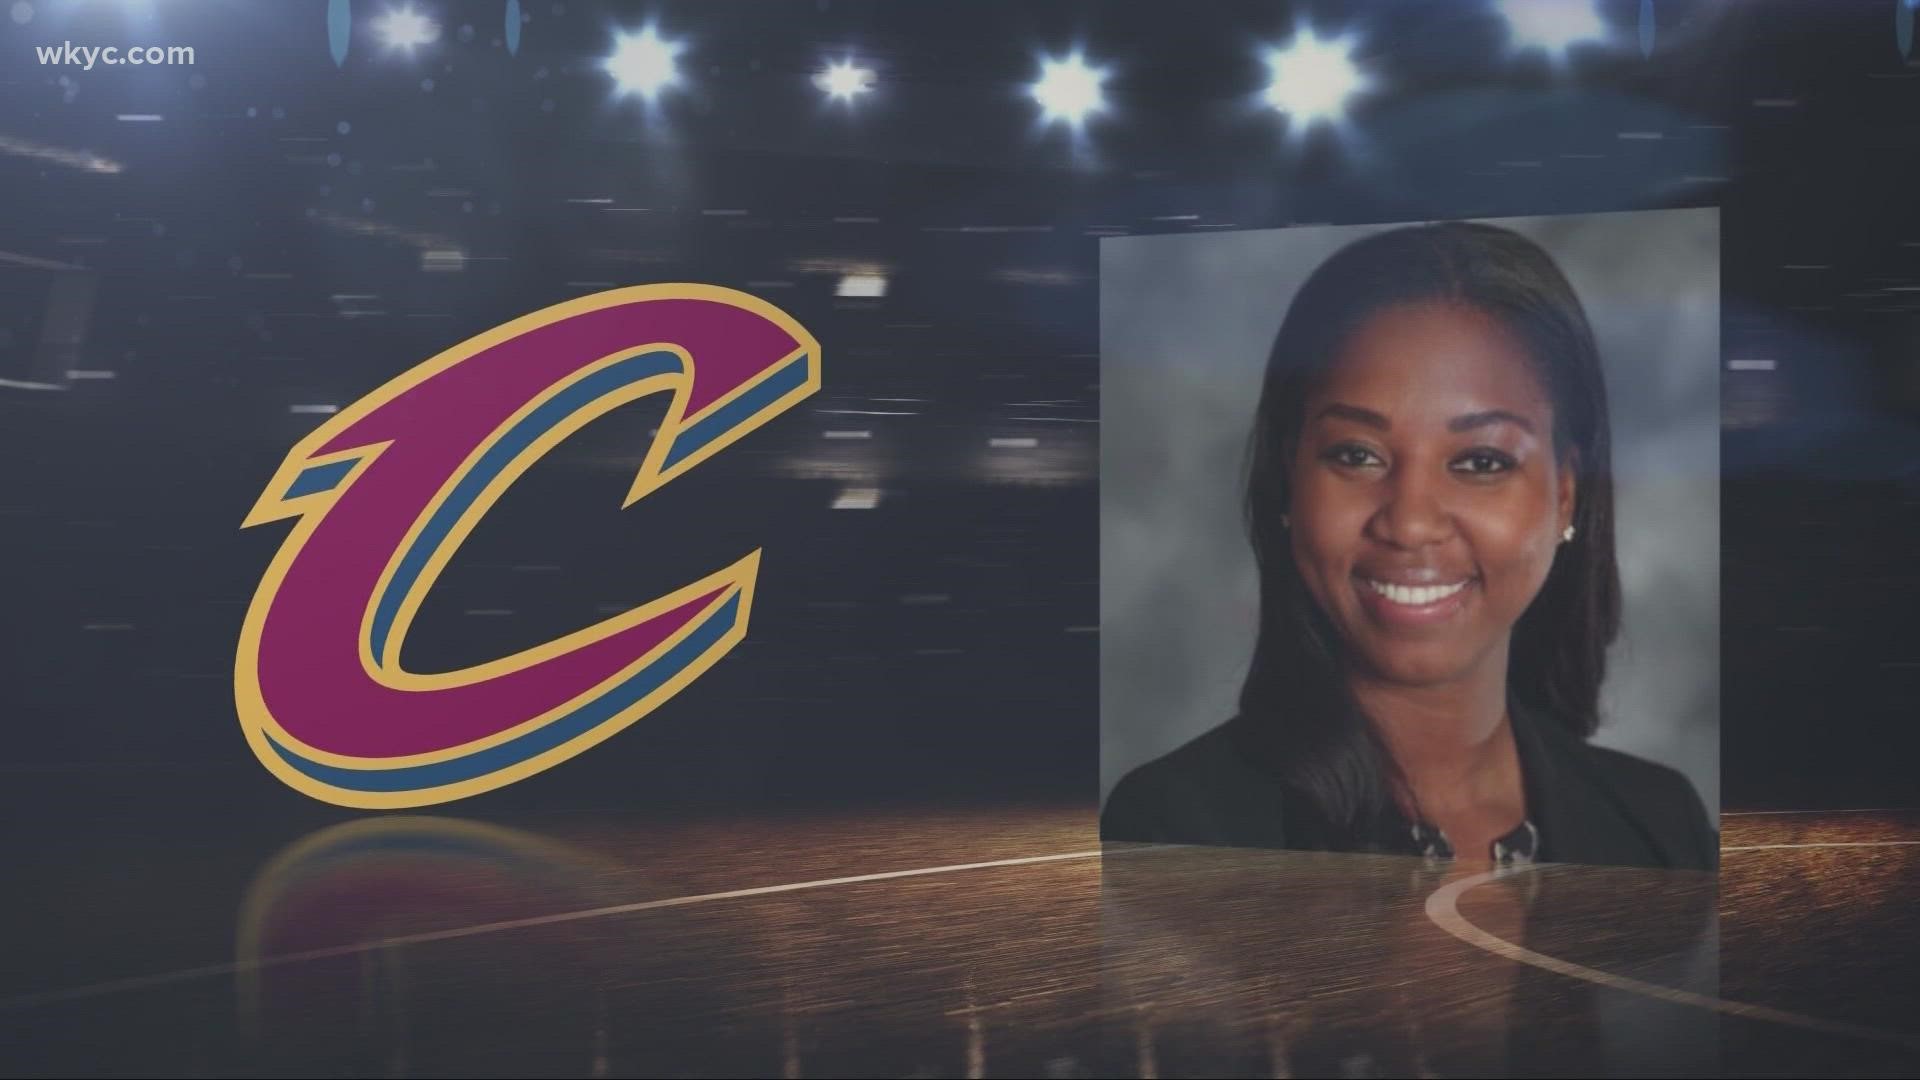 Cayette-Weston is the executive vice president and chief commercial officer for the Cleveland Cavaliers.